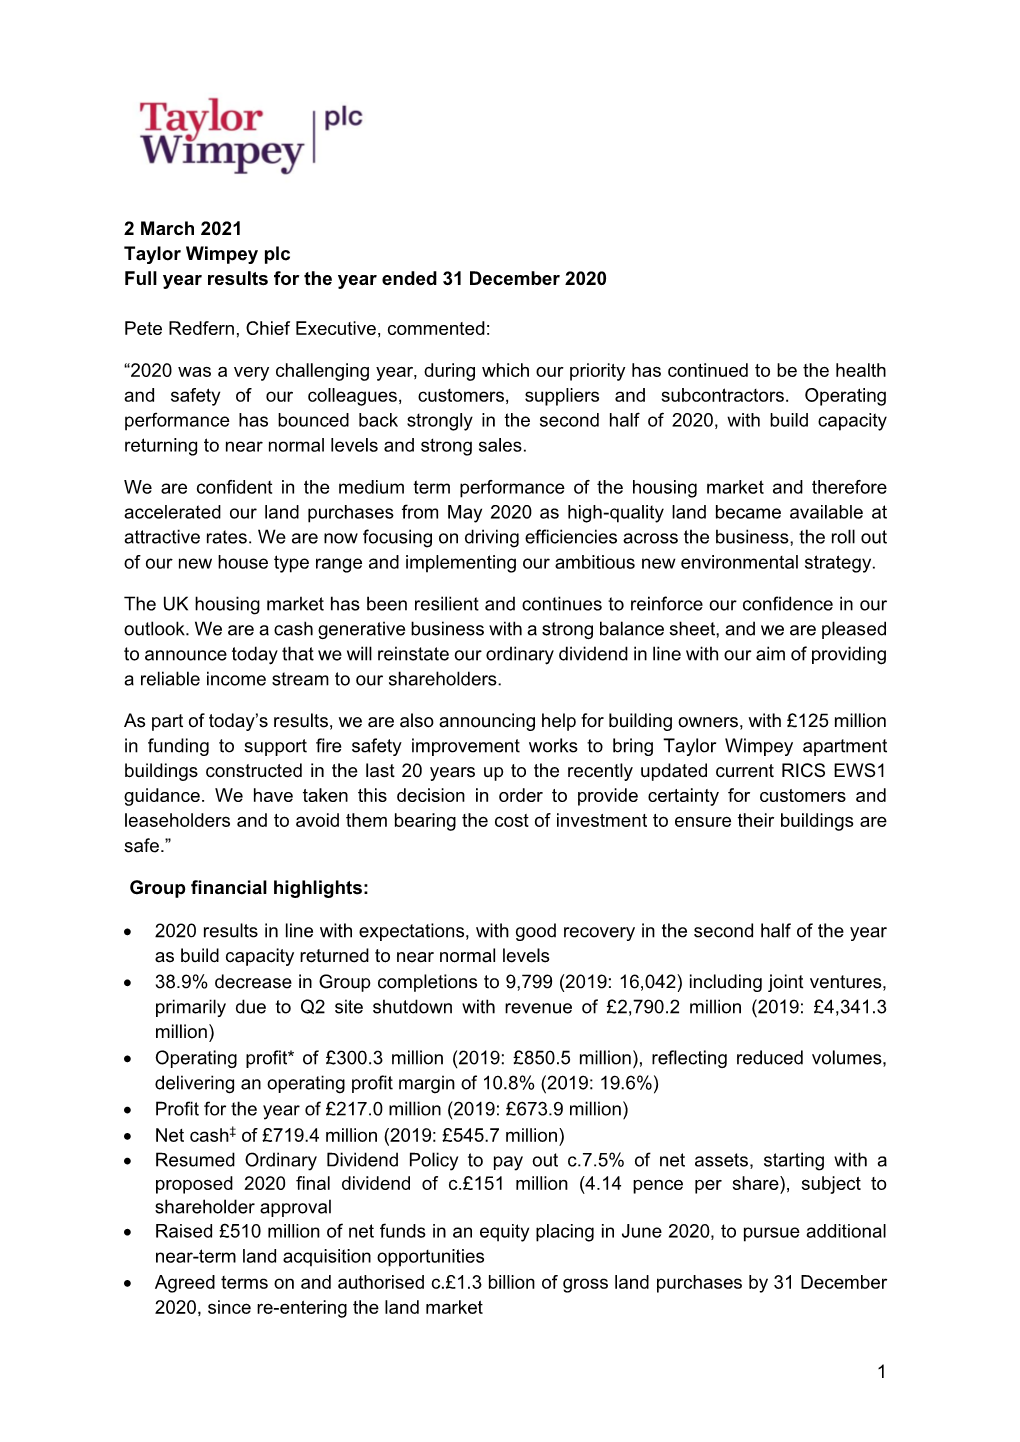 1 2 March 2021 Taylor Wimpey Plc Full Year Results for the Year Ended